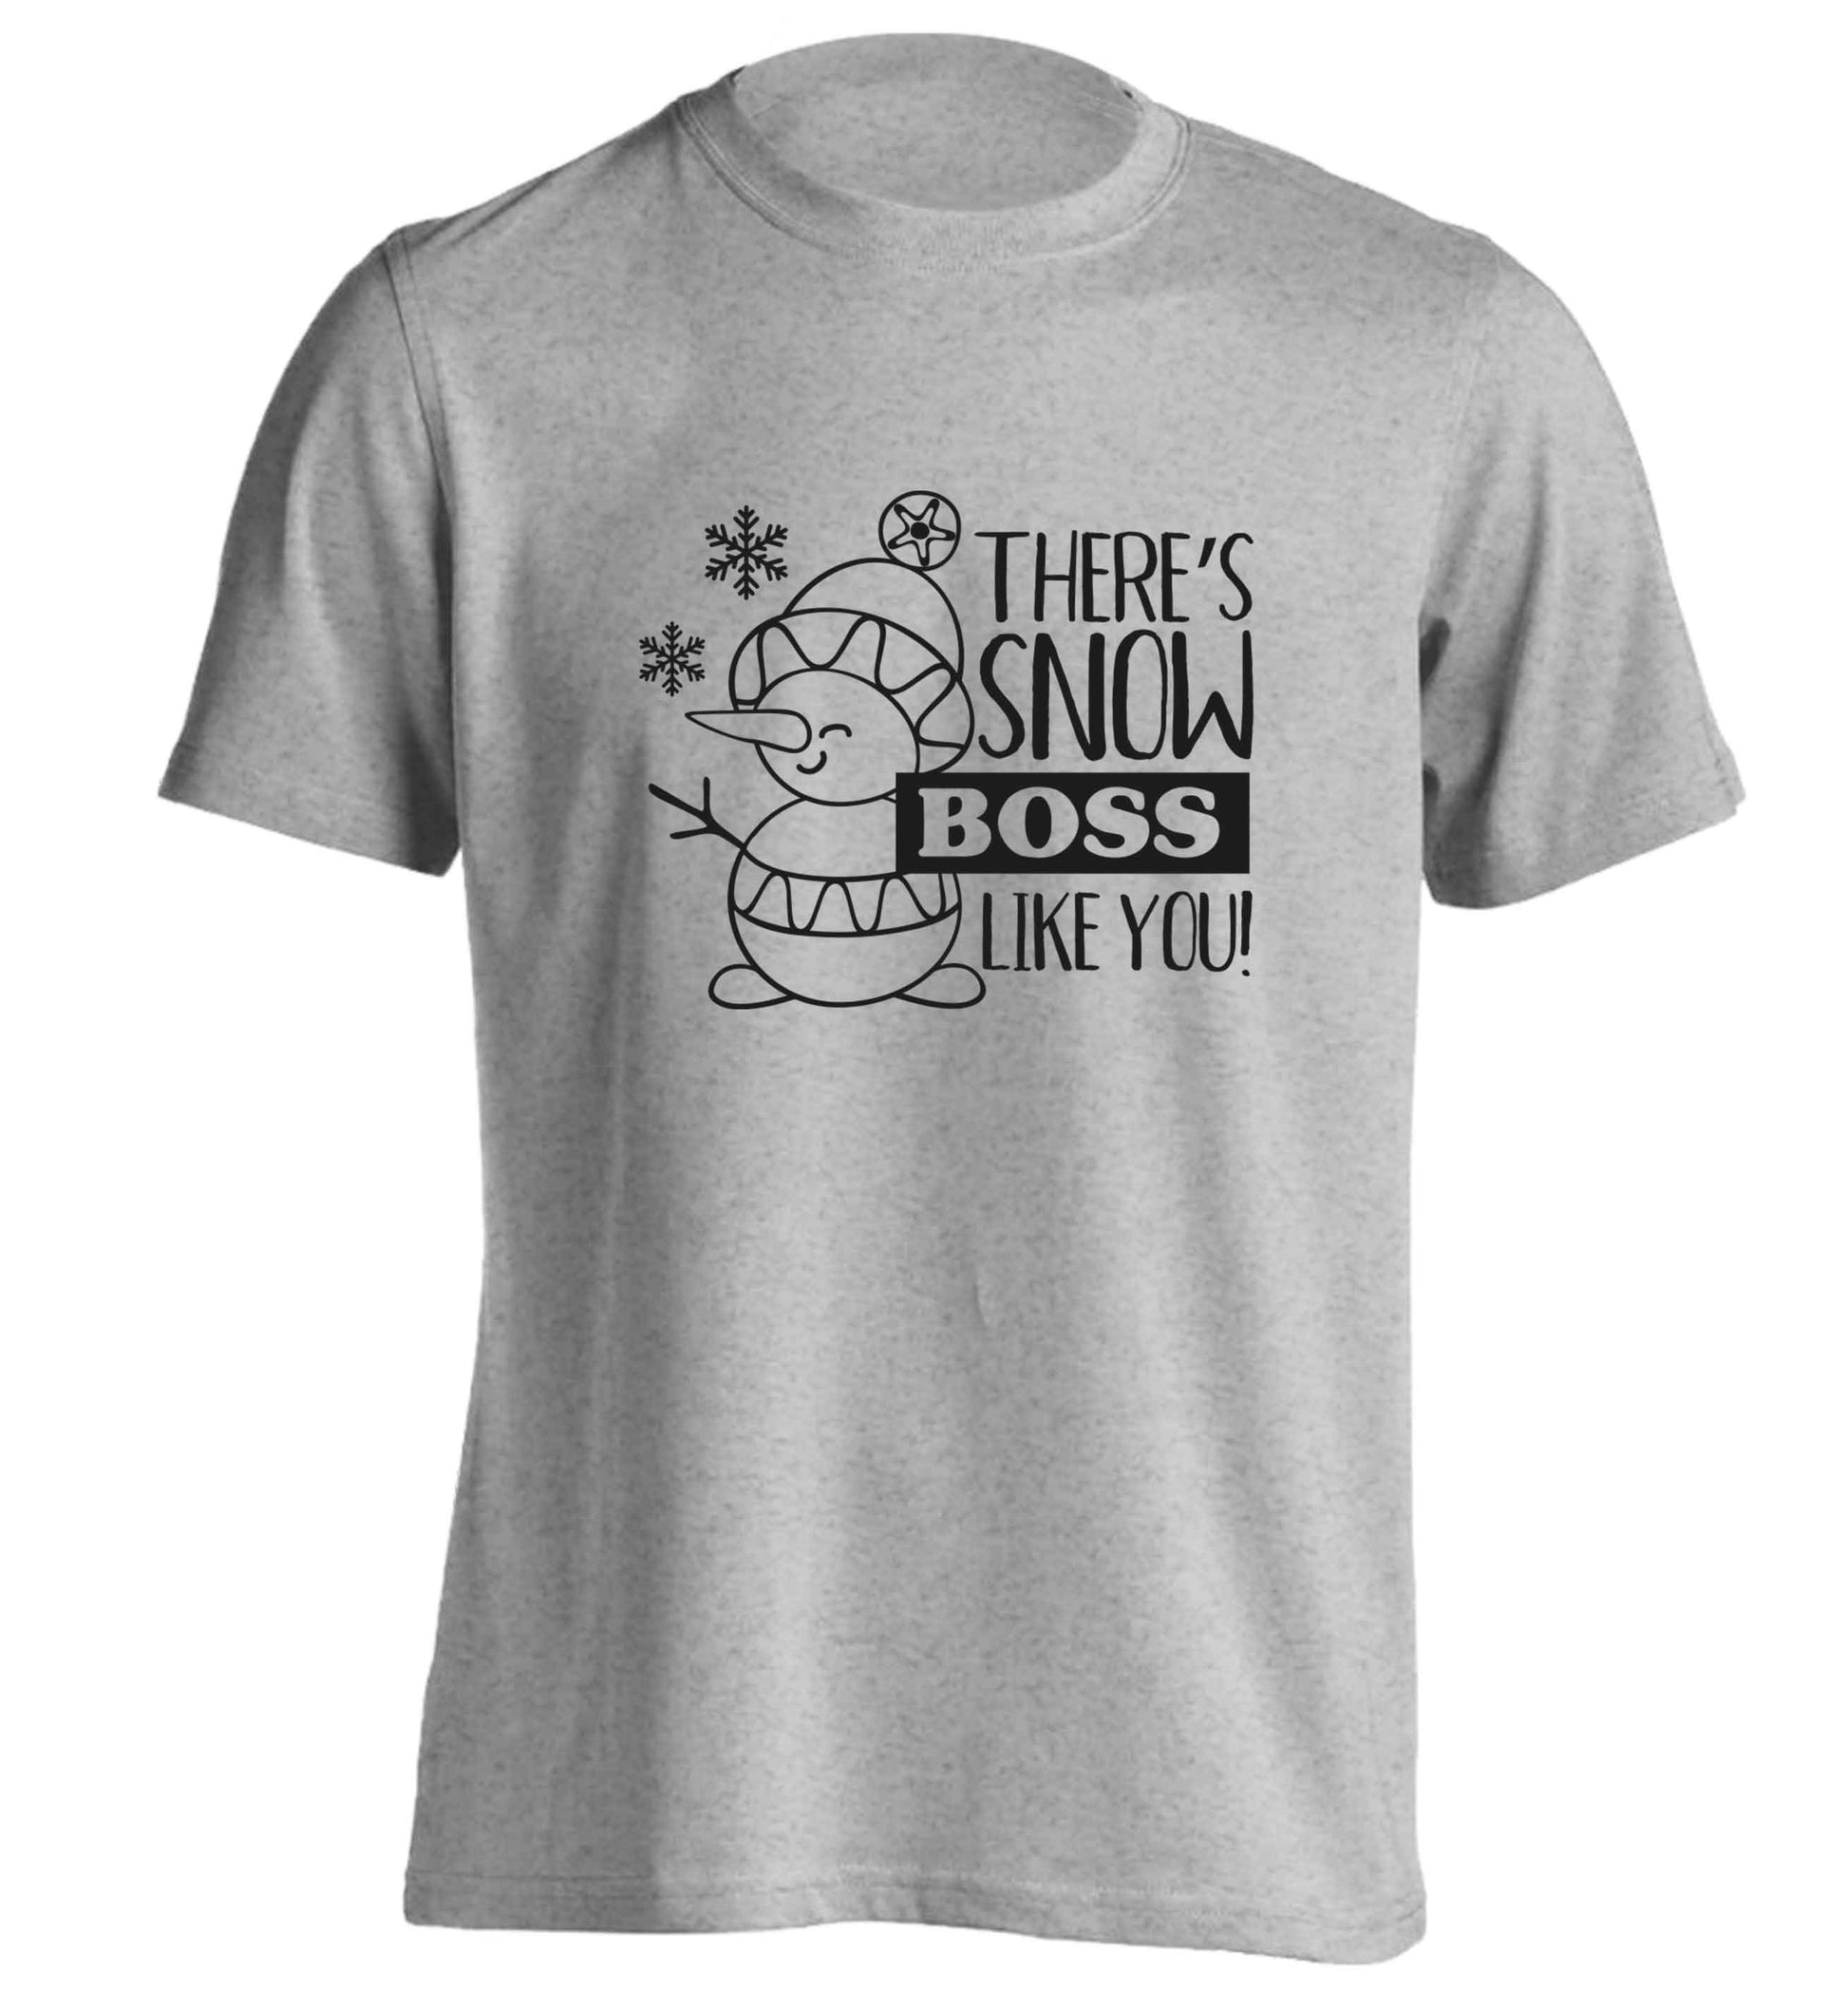 There's snow boss like you adults unisex grey Tshirt 2XL